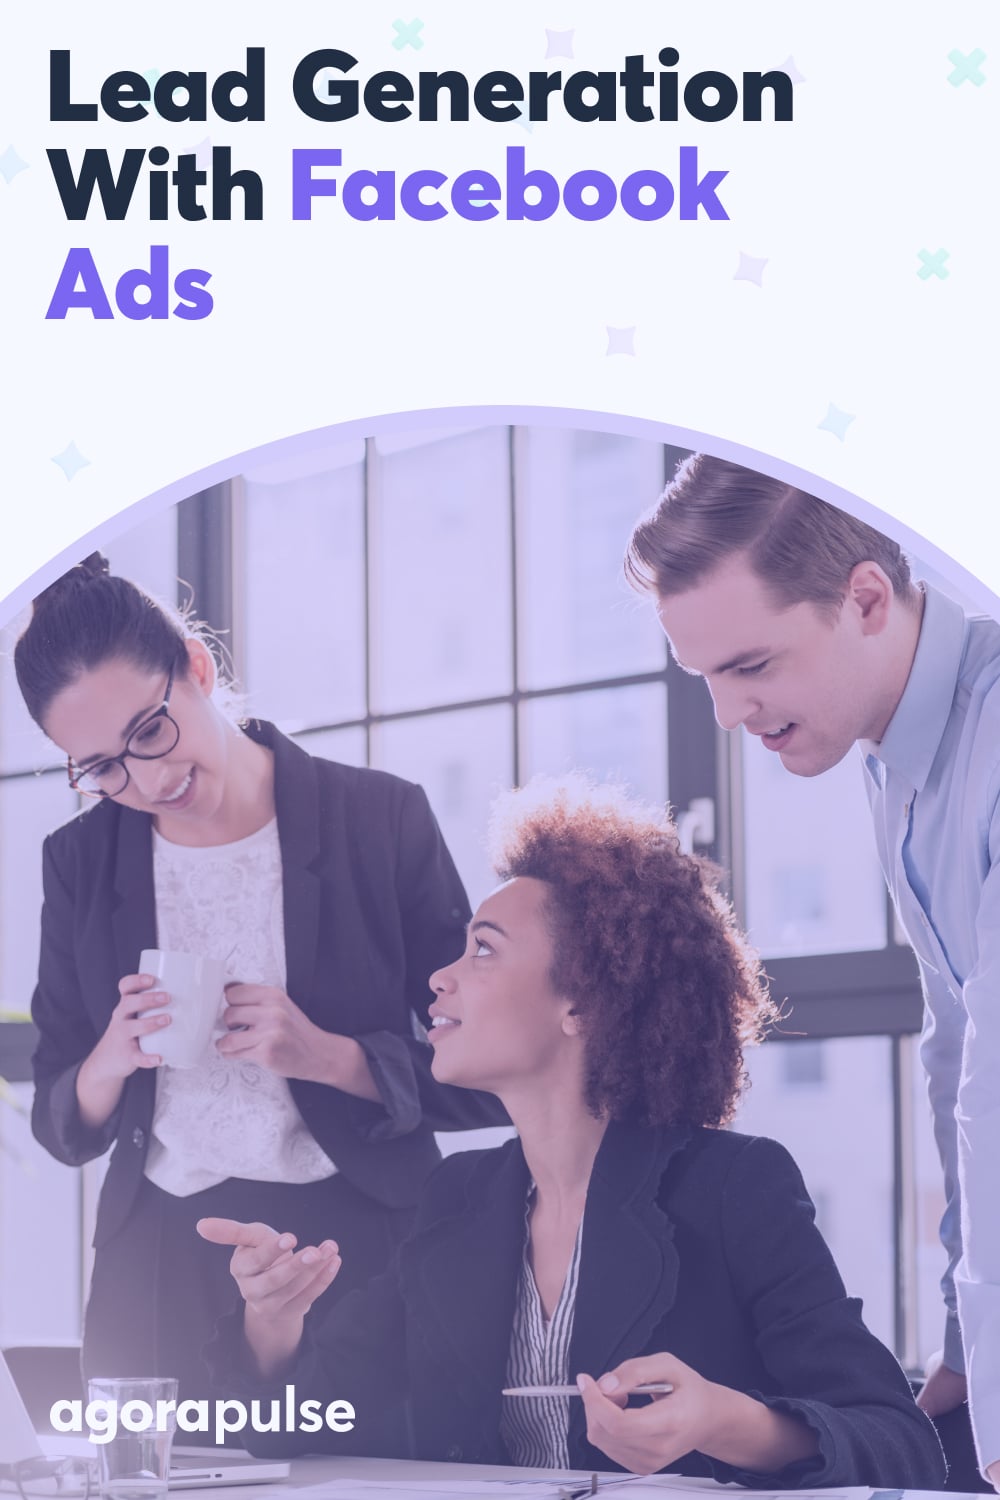 Four Tips for Getting More Leads and Conversions From Your Facebook Ads